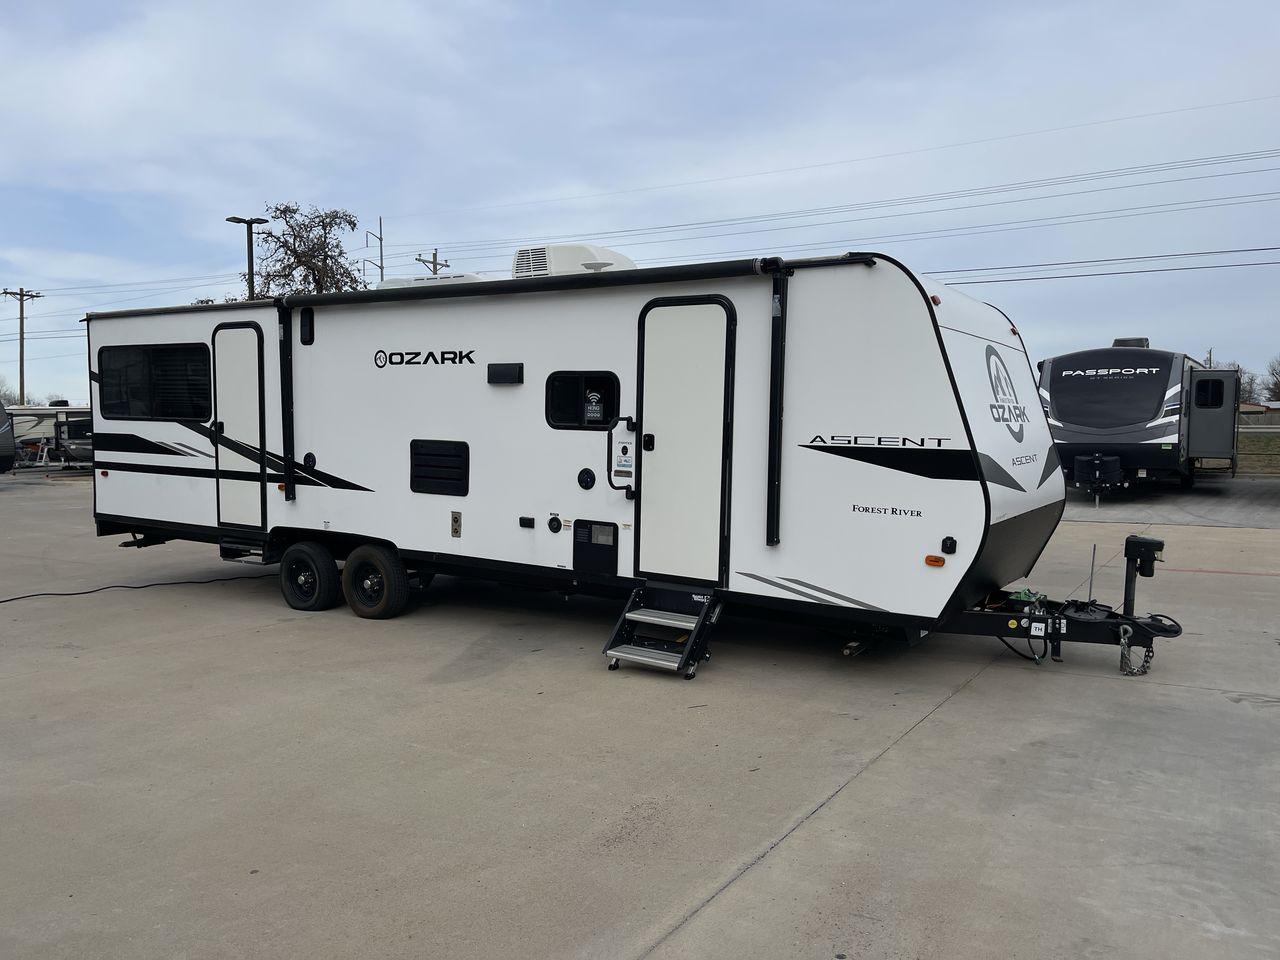 2021 FOREST RIVER OZARK 2700THX (5ZT2ZKSB7MG) , Length: 32.33 ft. | Dry Weight: 5,683 lbs. | Gross Weight: 7,830 lbs. | Slides: 1 transmission, located at 4319 N Main Street, Cleburne, TX, 76033, (817) 221-0660, 32.435829, -97.384178 - Measuring ~32 feet in length, this RV combines compactness with functionality, making it an ideal choice for both weekend getaways and extended road trips. The Ozark 2700THX features a features a single slide-out, providing a well-designed and spacious interior. The 2700THX boasts a dedicated garage - Photo #19